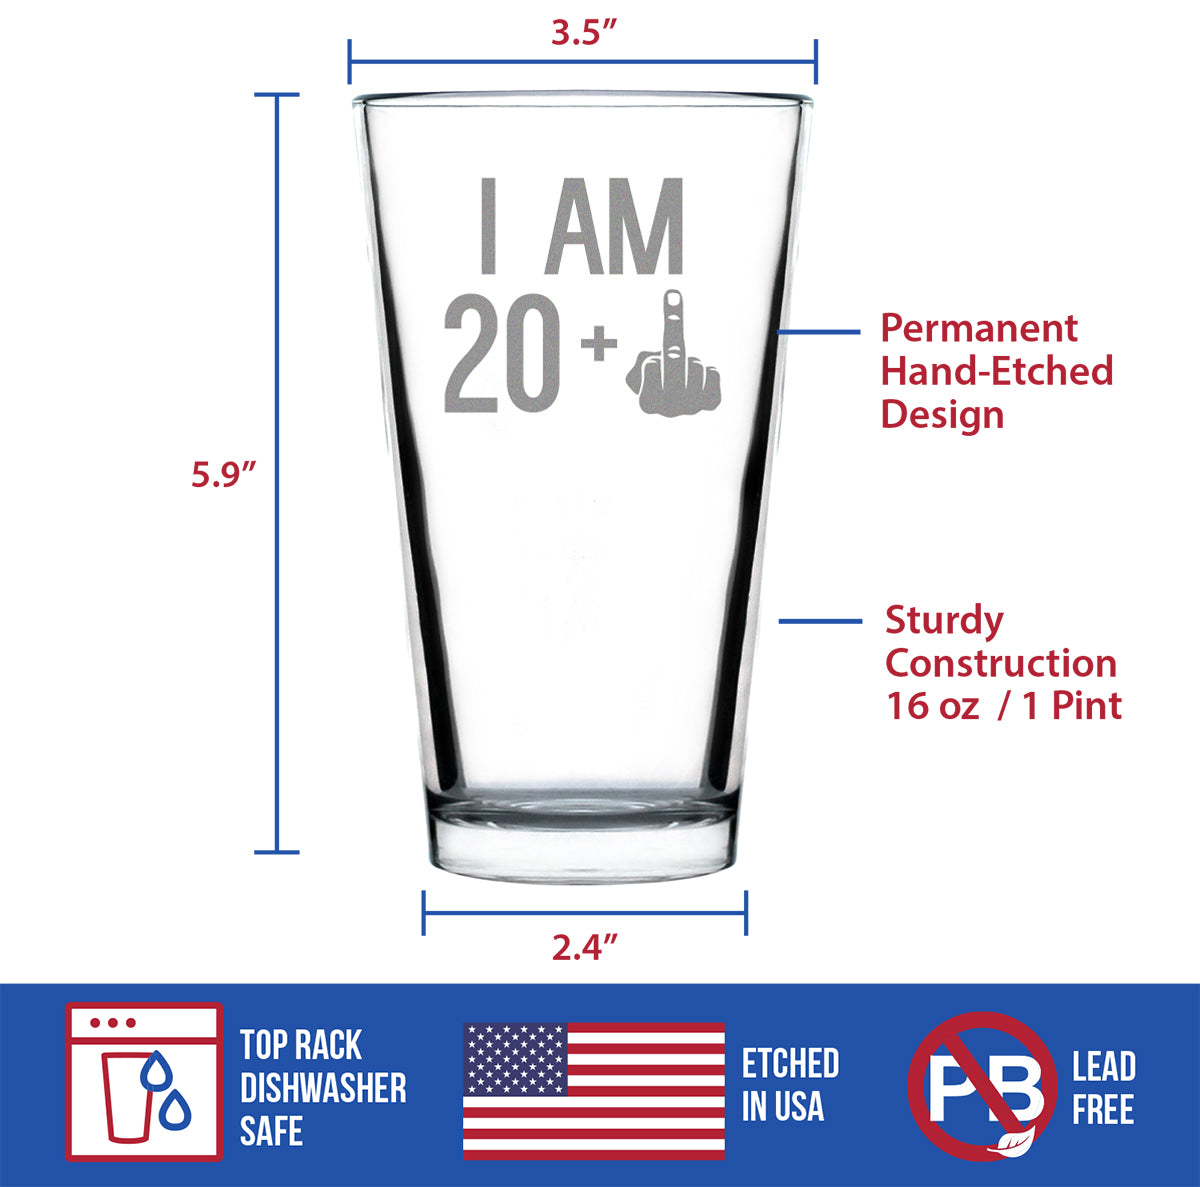 20 + 1 Middle Finger - 16 oz Pint Glass for Beer - Funny 21st Birthday Gifts for Men Turning 21